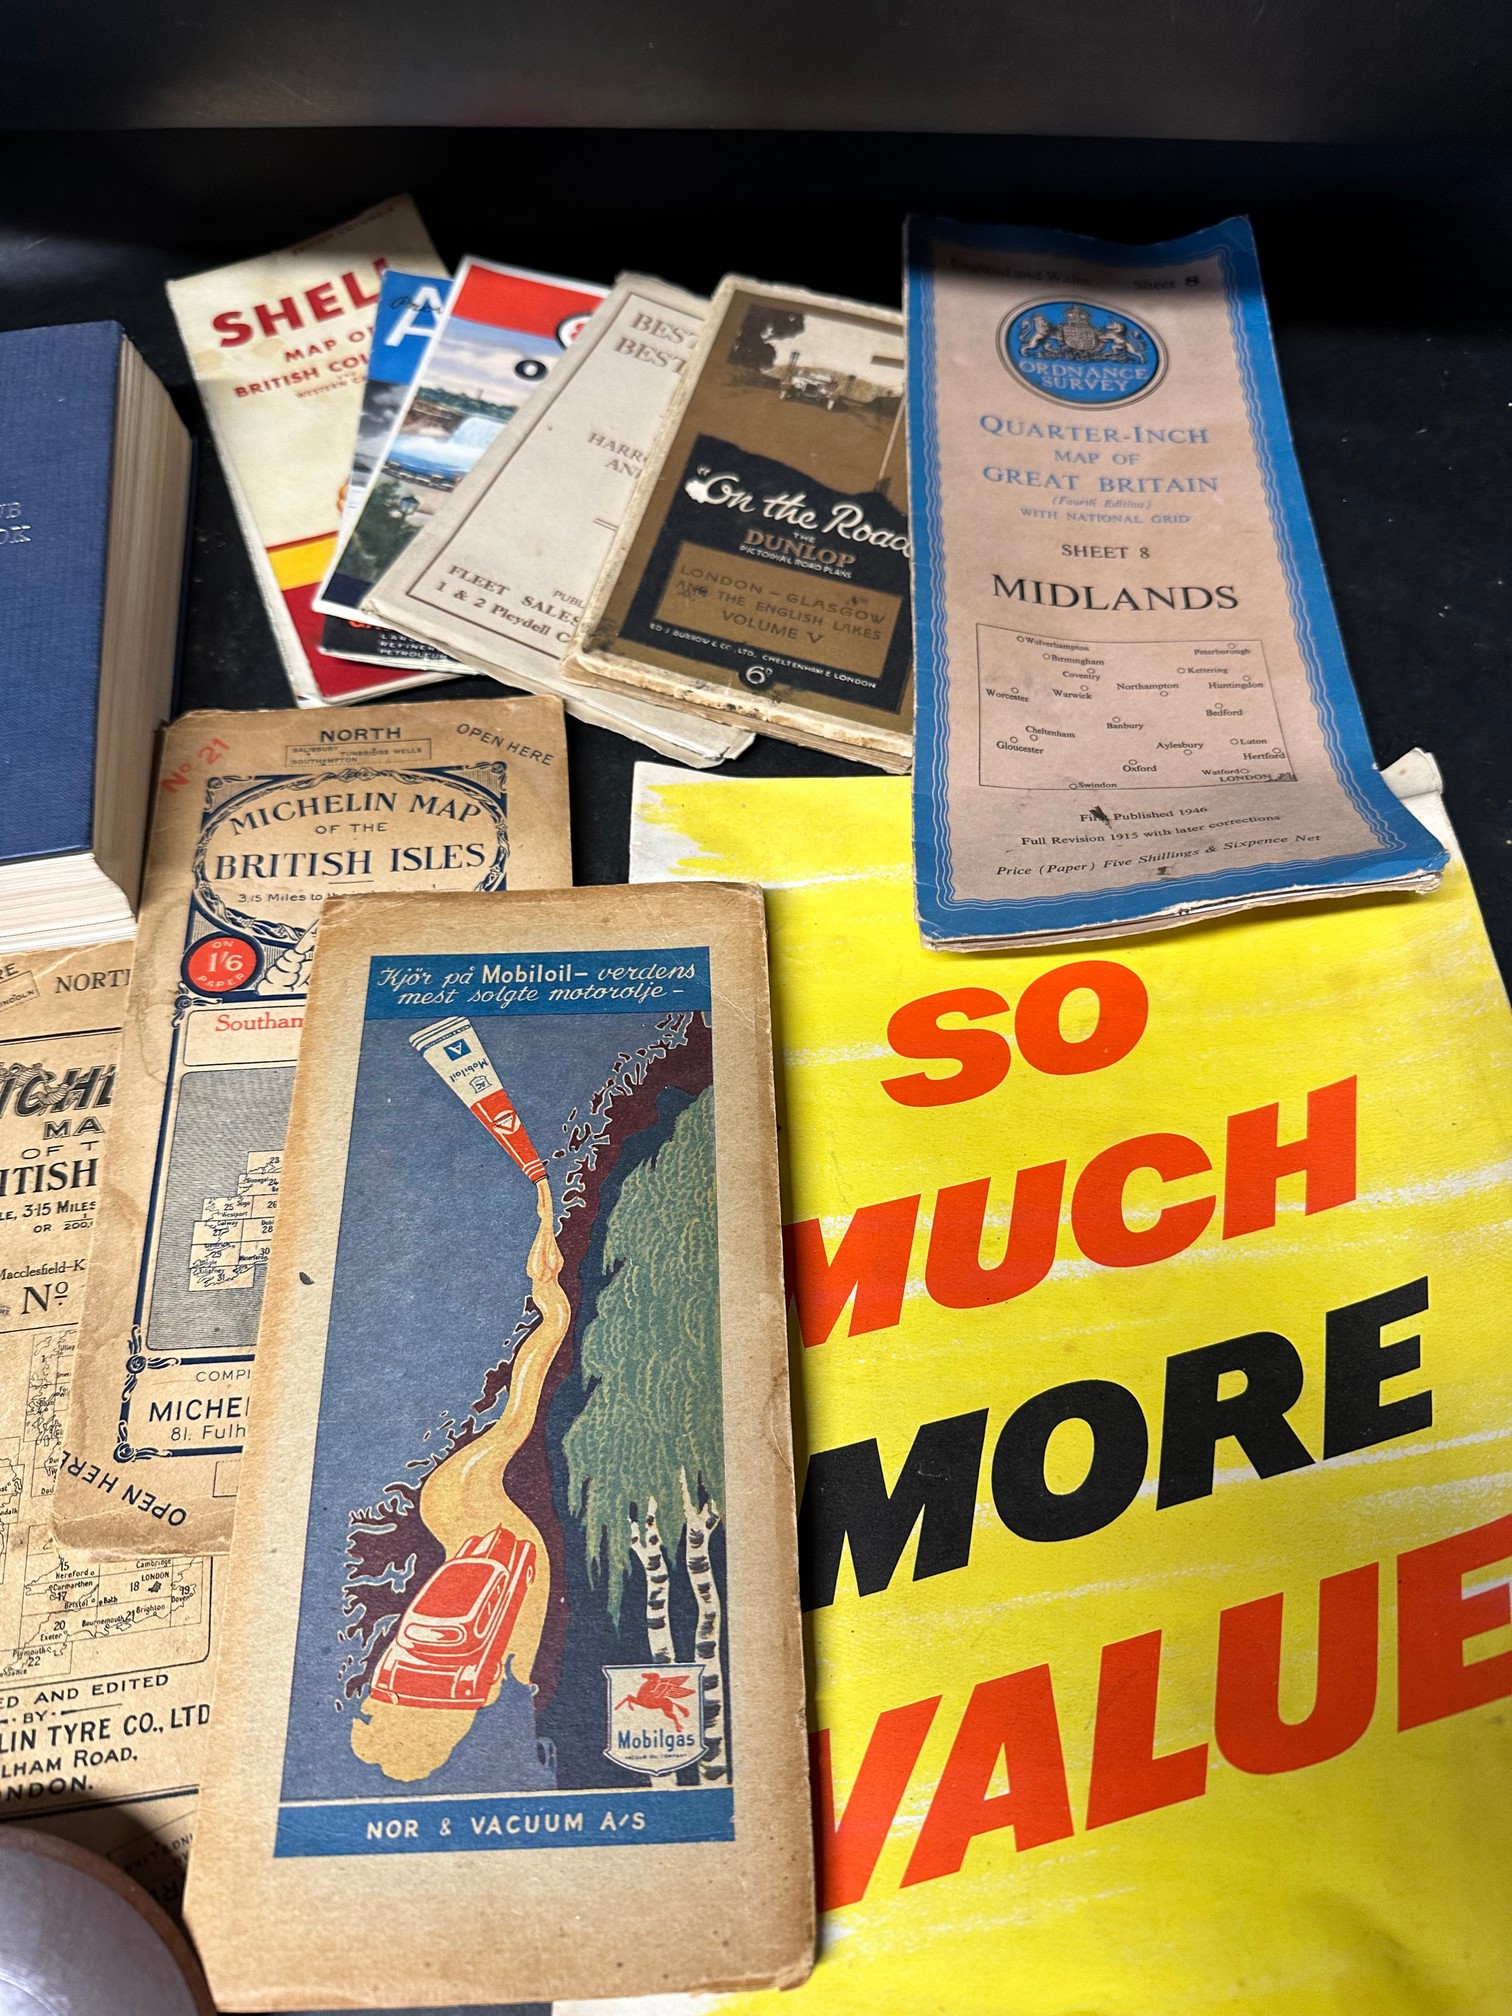 Two editions of The Dunlop Book, a 1958 RAC Guide and Handbook, a Lucas parts hanging chart, various - Image 3 of 6